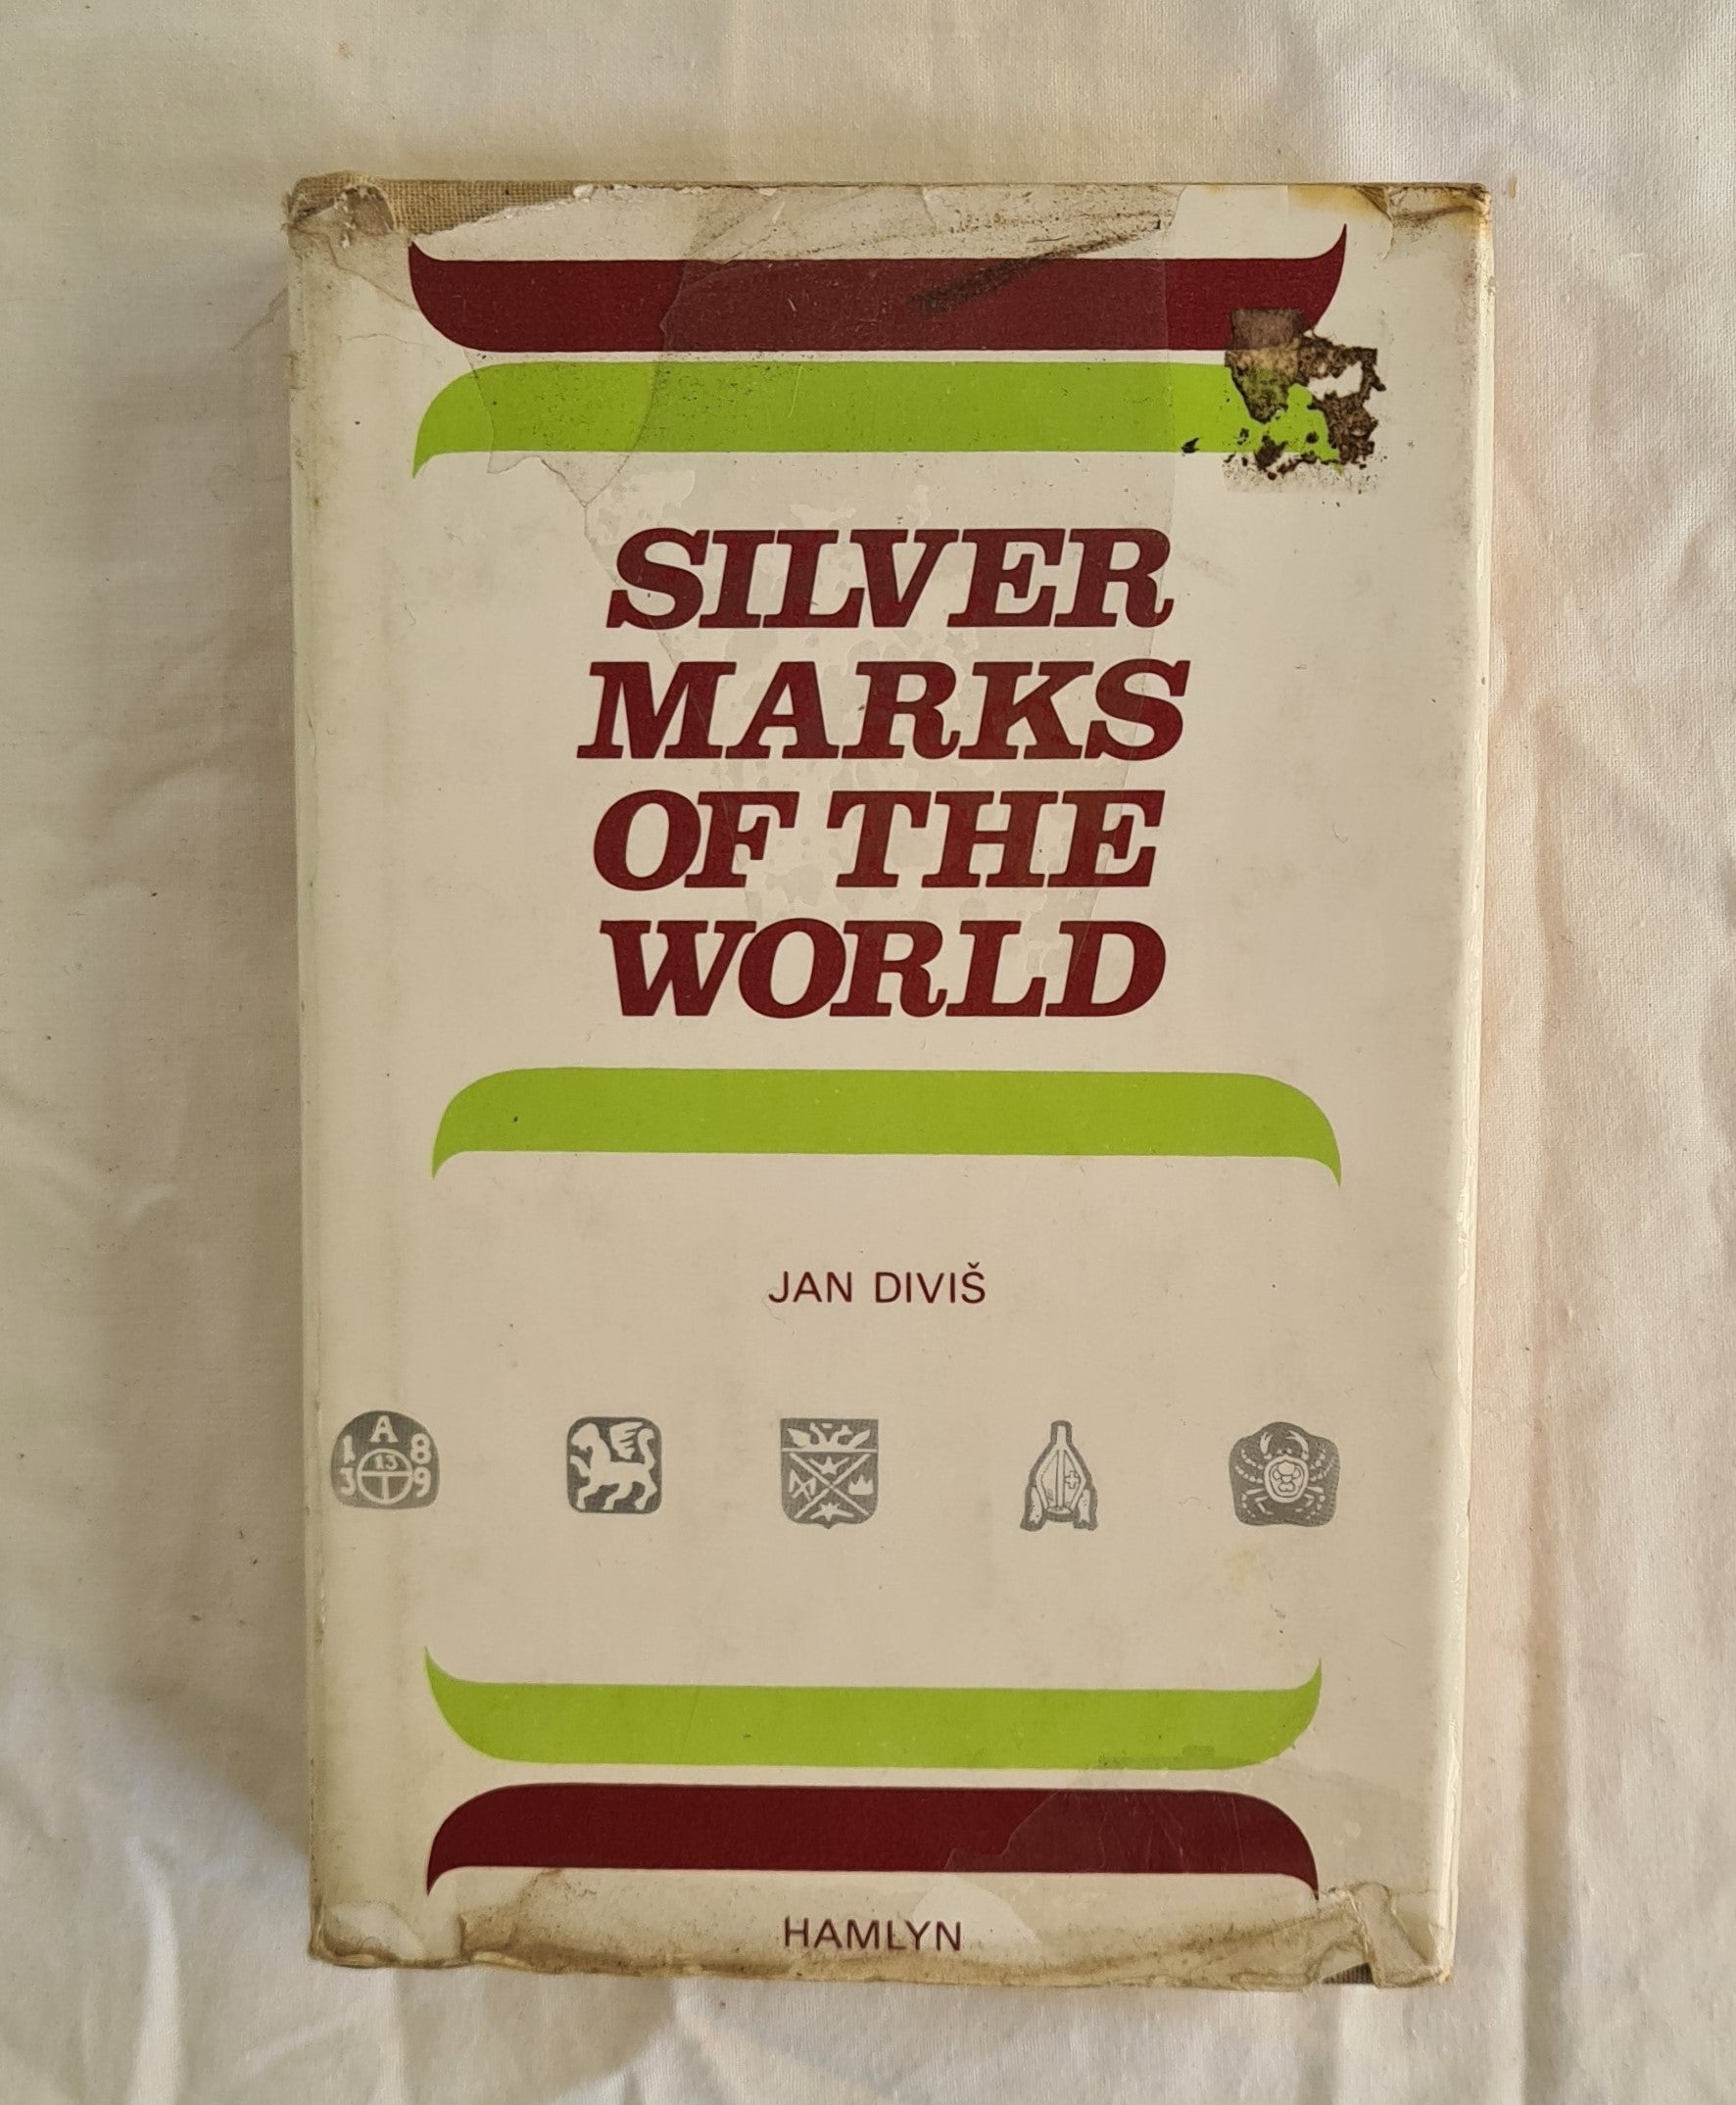 Silver Marks of the World by Jan Divis